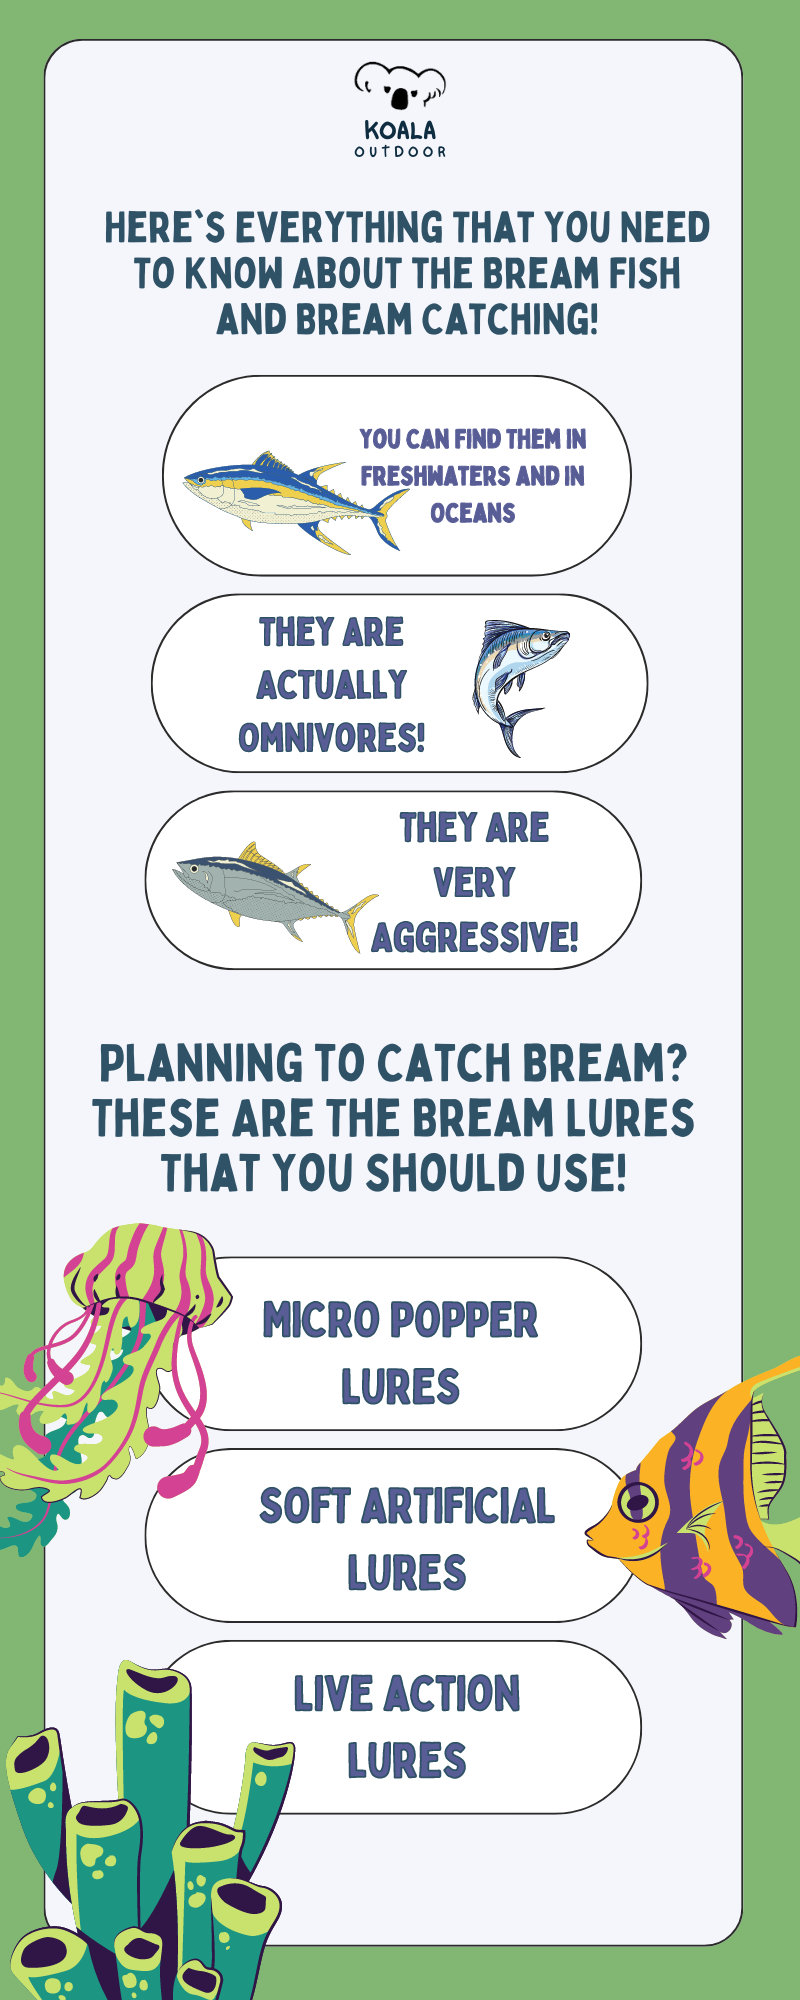 Bream Fish 101: Tips and Tricks for Catching Bream